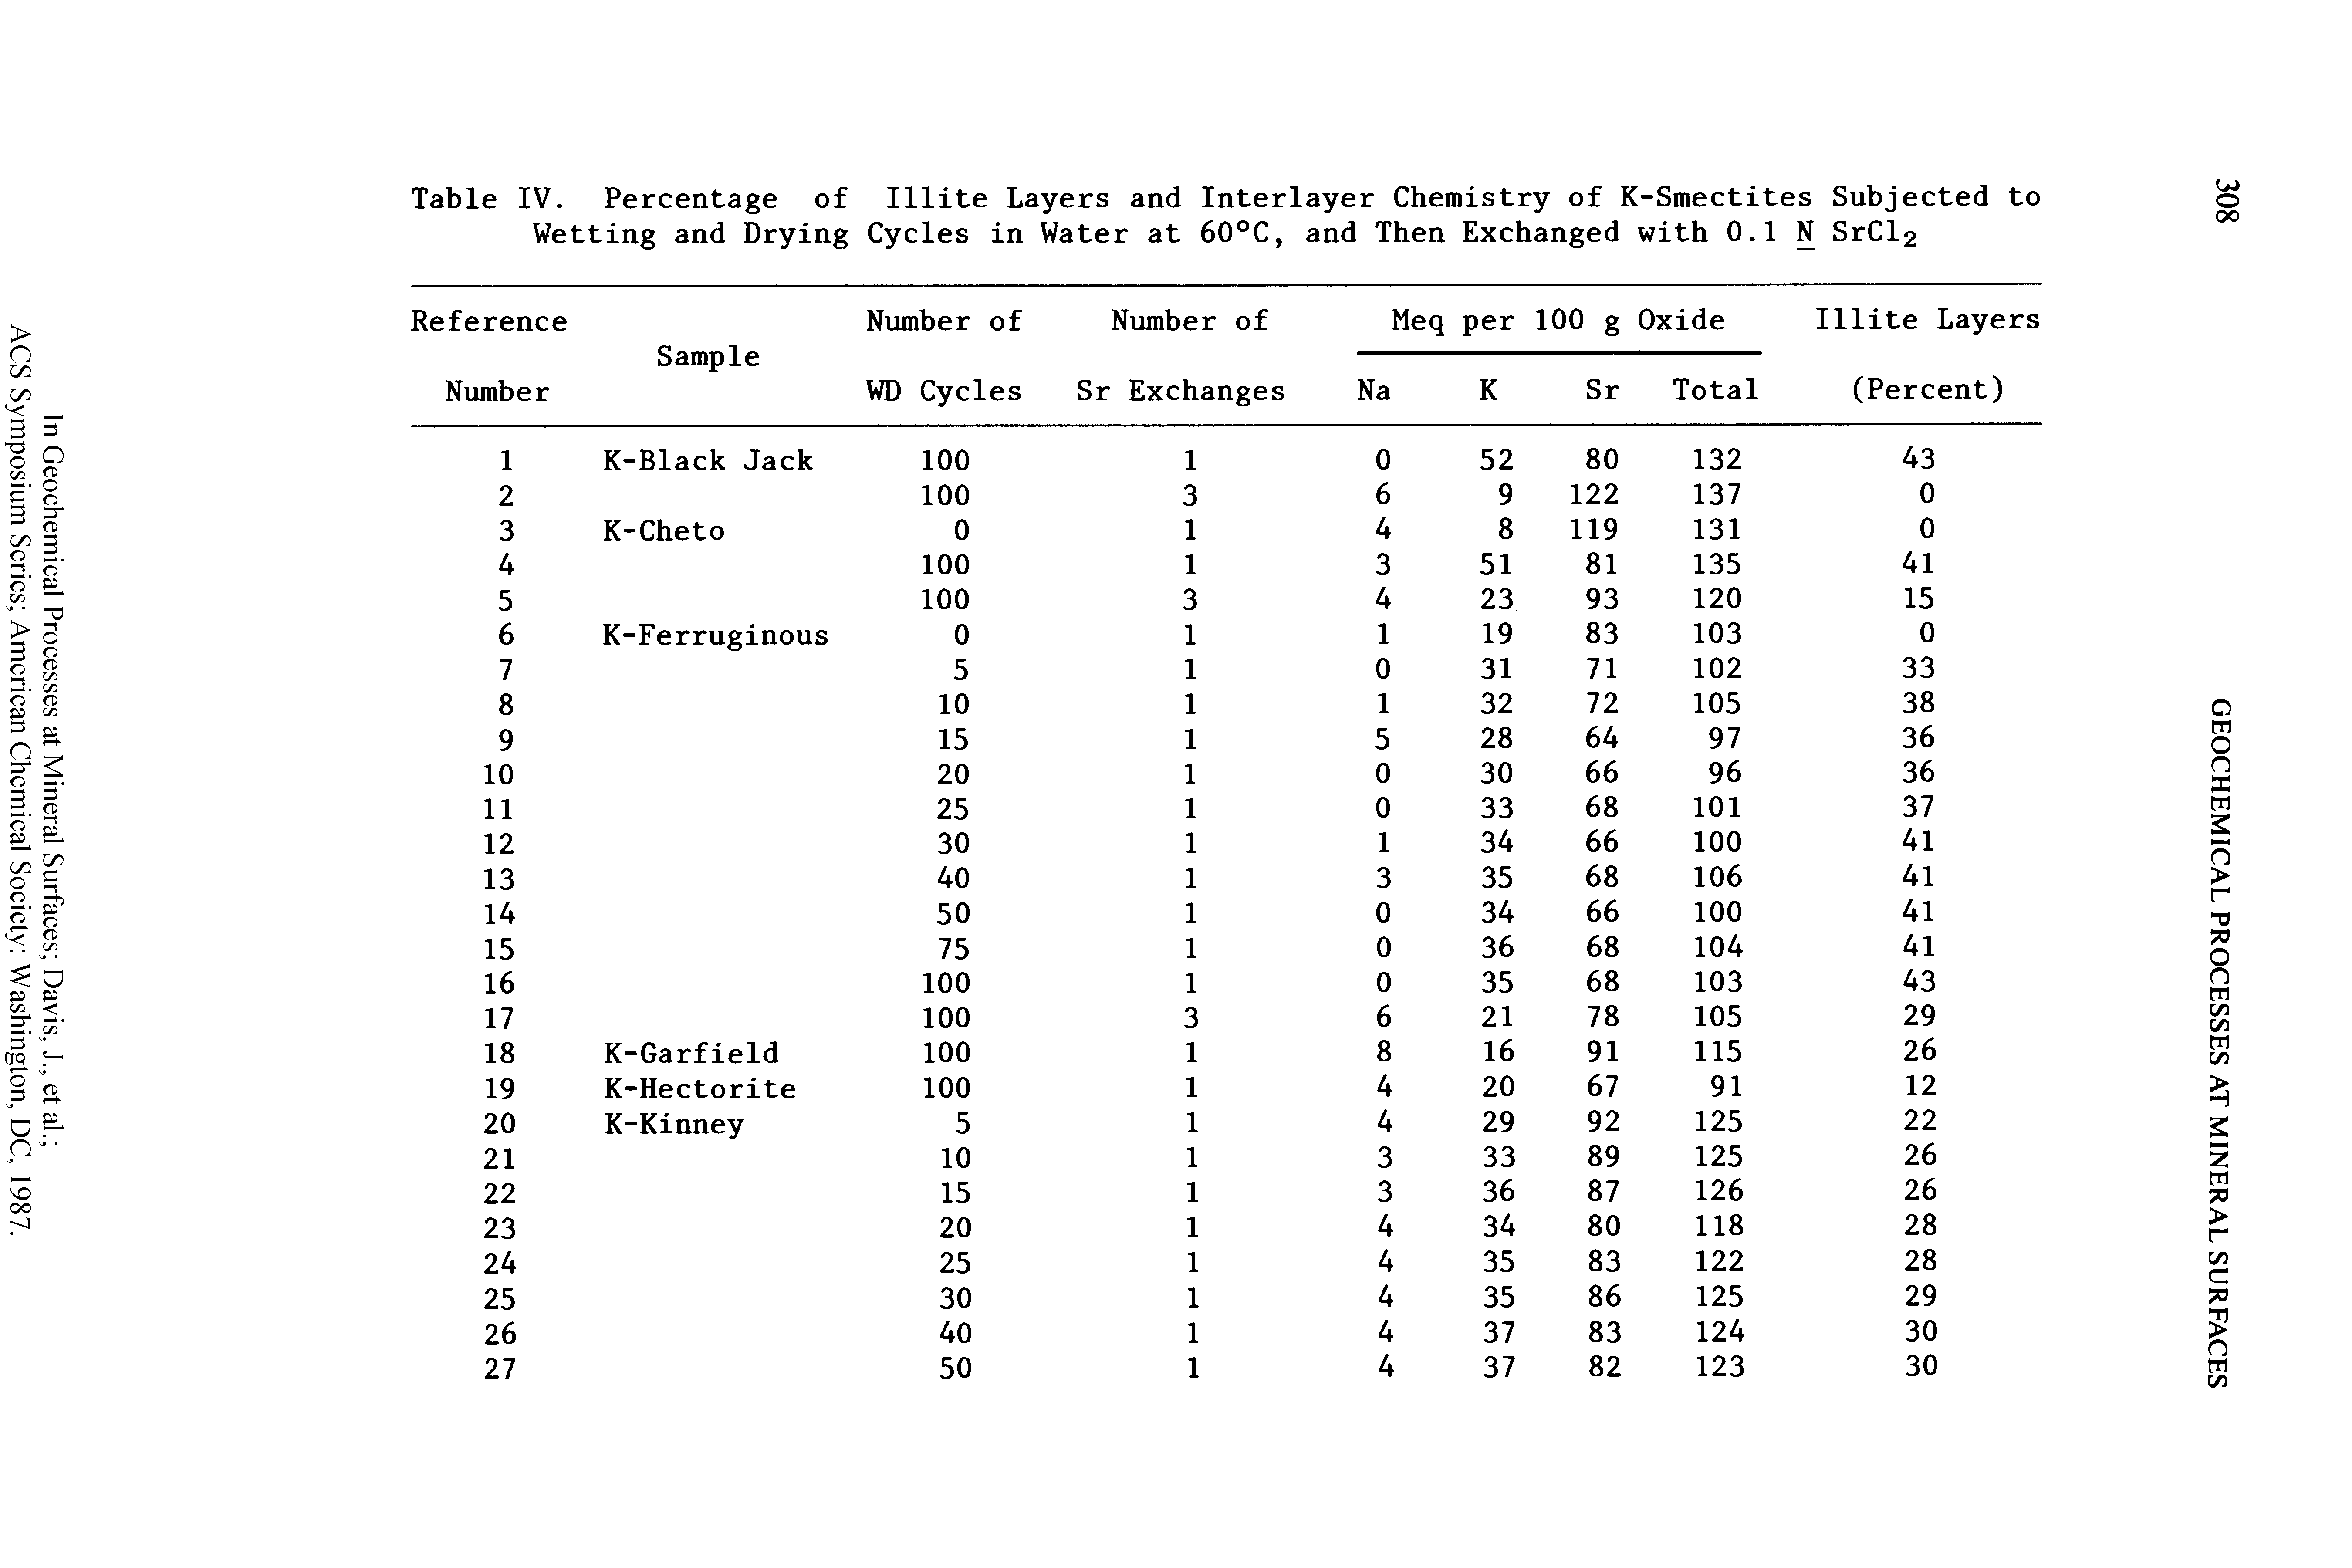 Table IV. Percentage of Illite Layers and Interlayer Chemistry of K-Smectites Subjected to Wetting and Drying Cycles in Water at 60°C, and Then Exchanged with 0.1 N SrCl2...